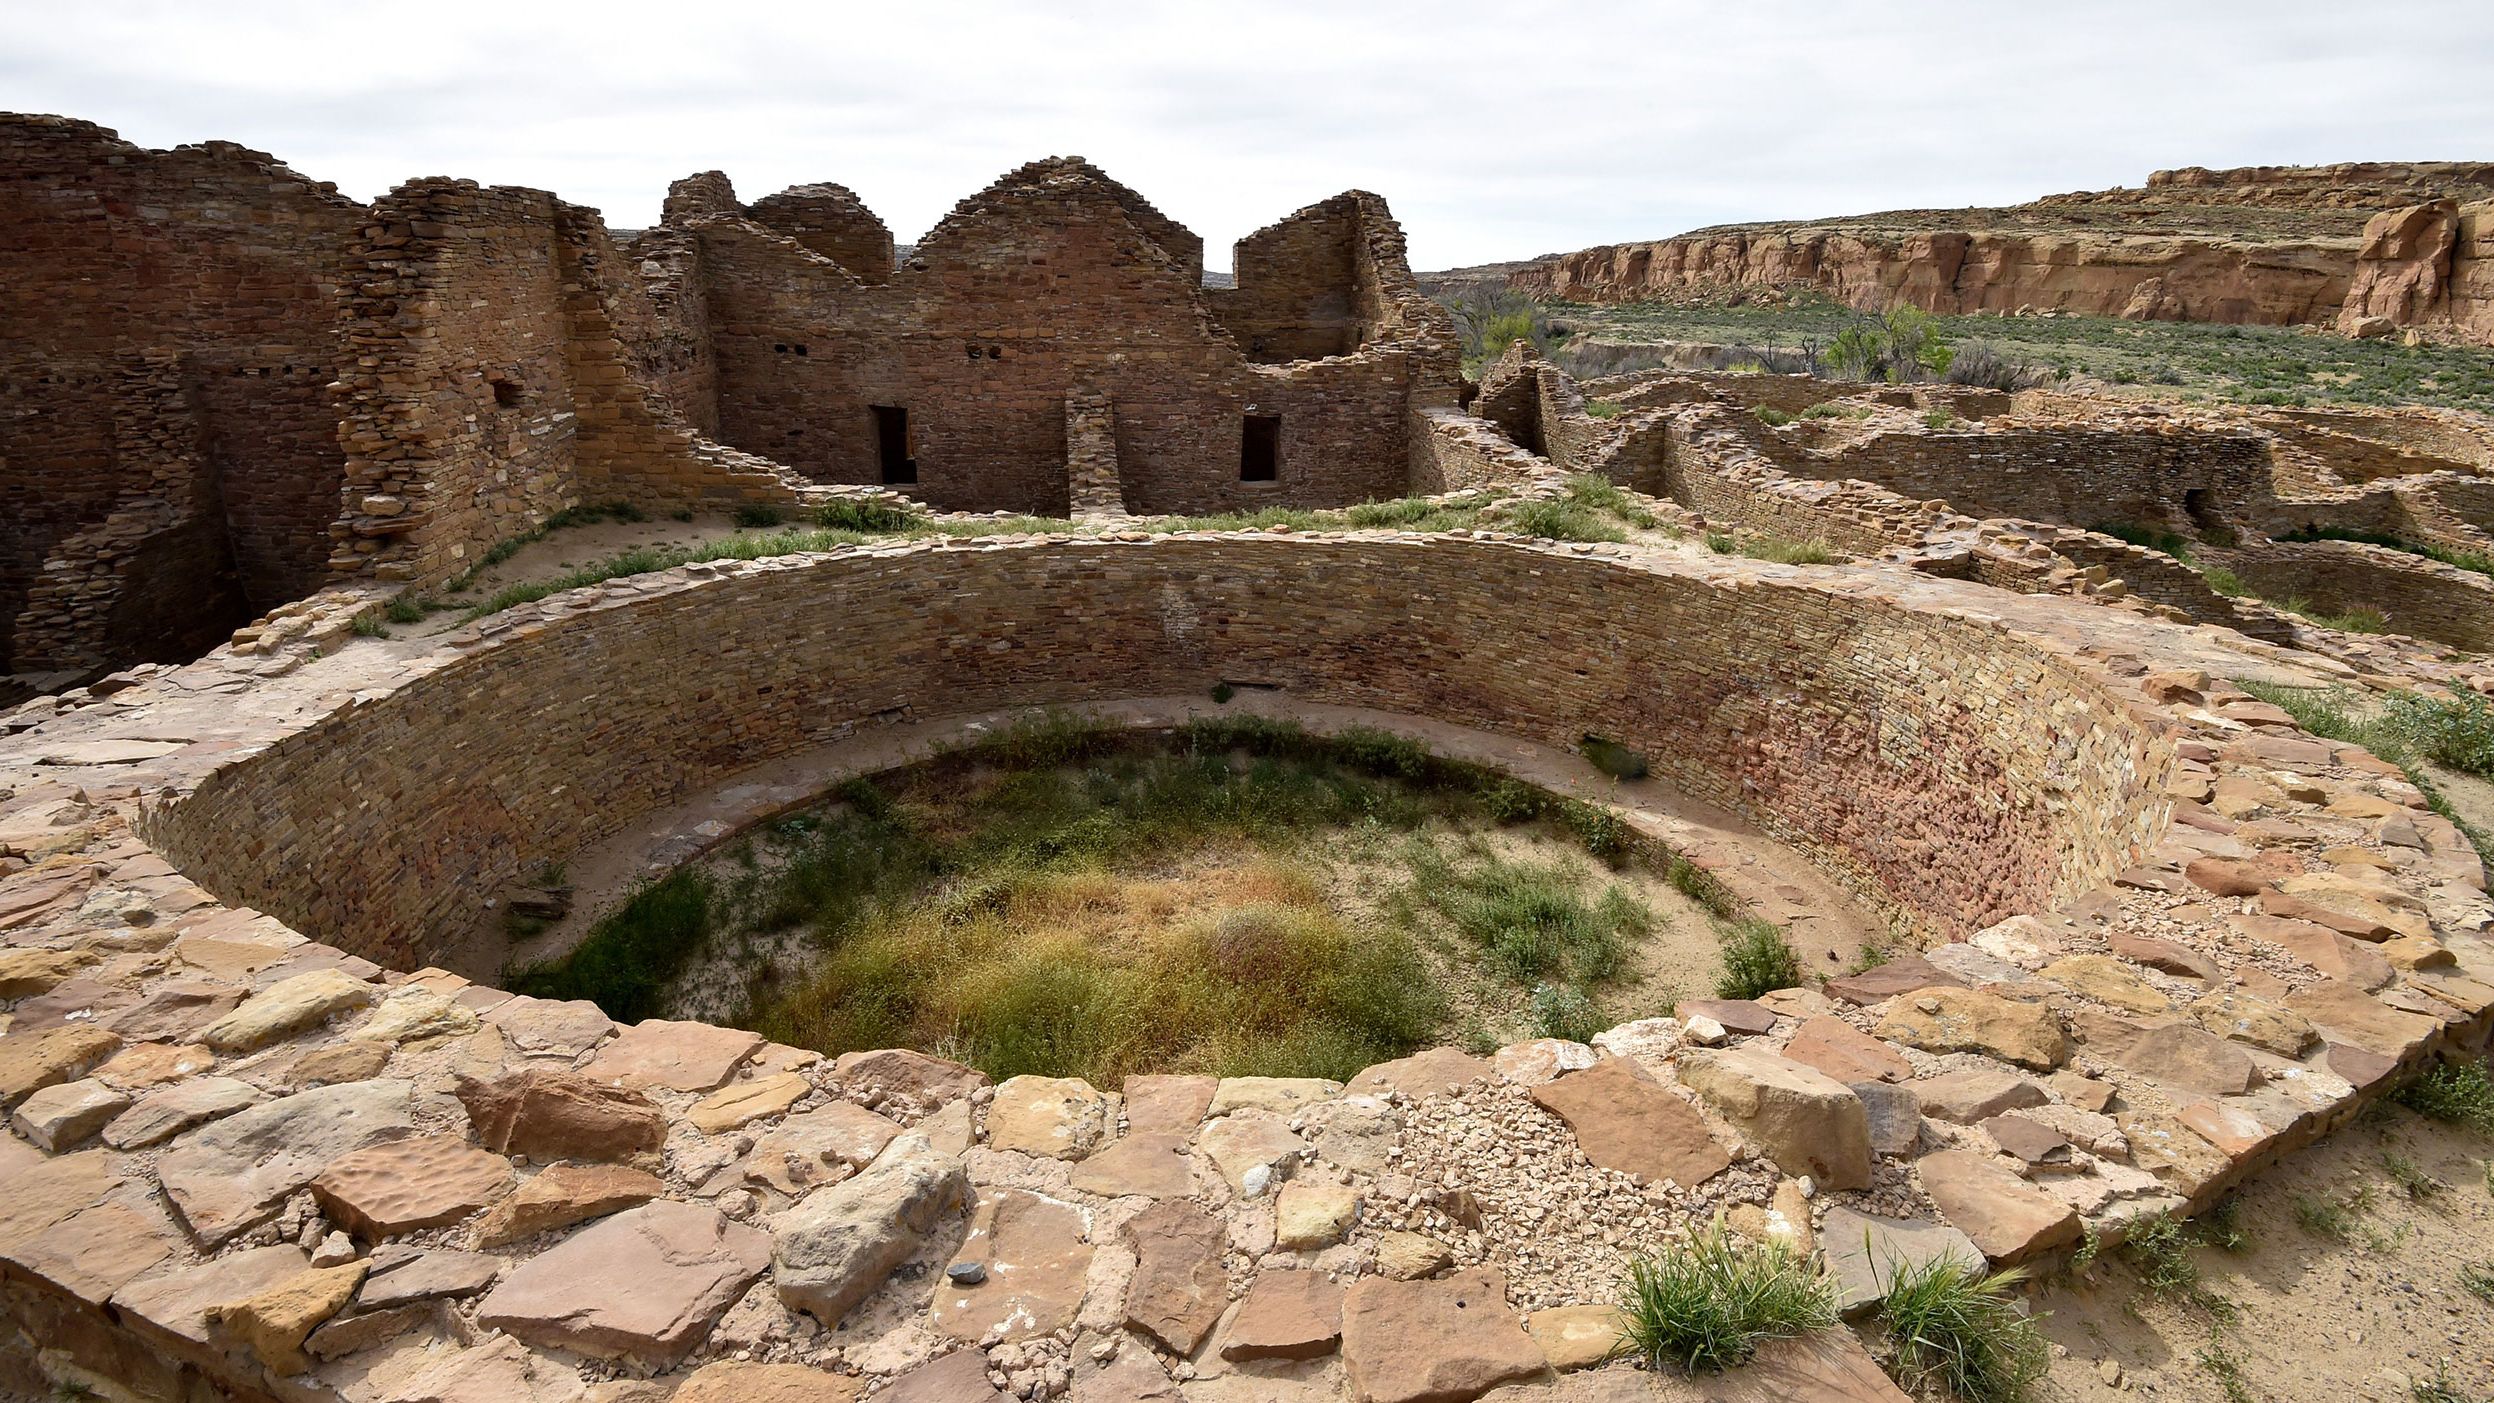 The ruins of Pueblo del Arroyo house at Chaco Culture National Historical Park in New Mexico.